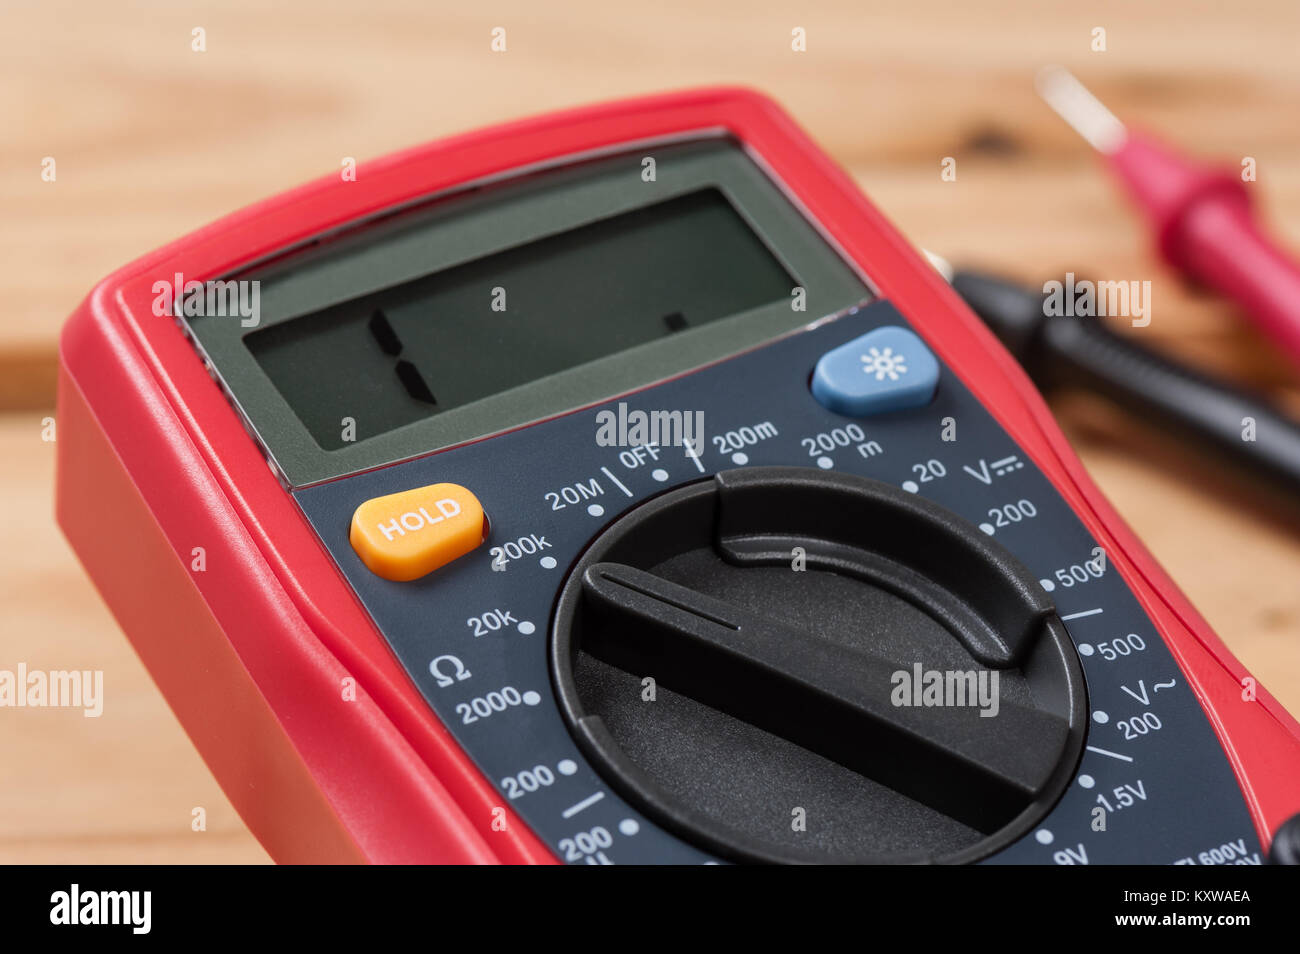 digital multimeter or multitester or Volt-Ohm meter, an electronic  measuring instrument that combines several measurement functions in one unit  Stock Photo - Alamy